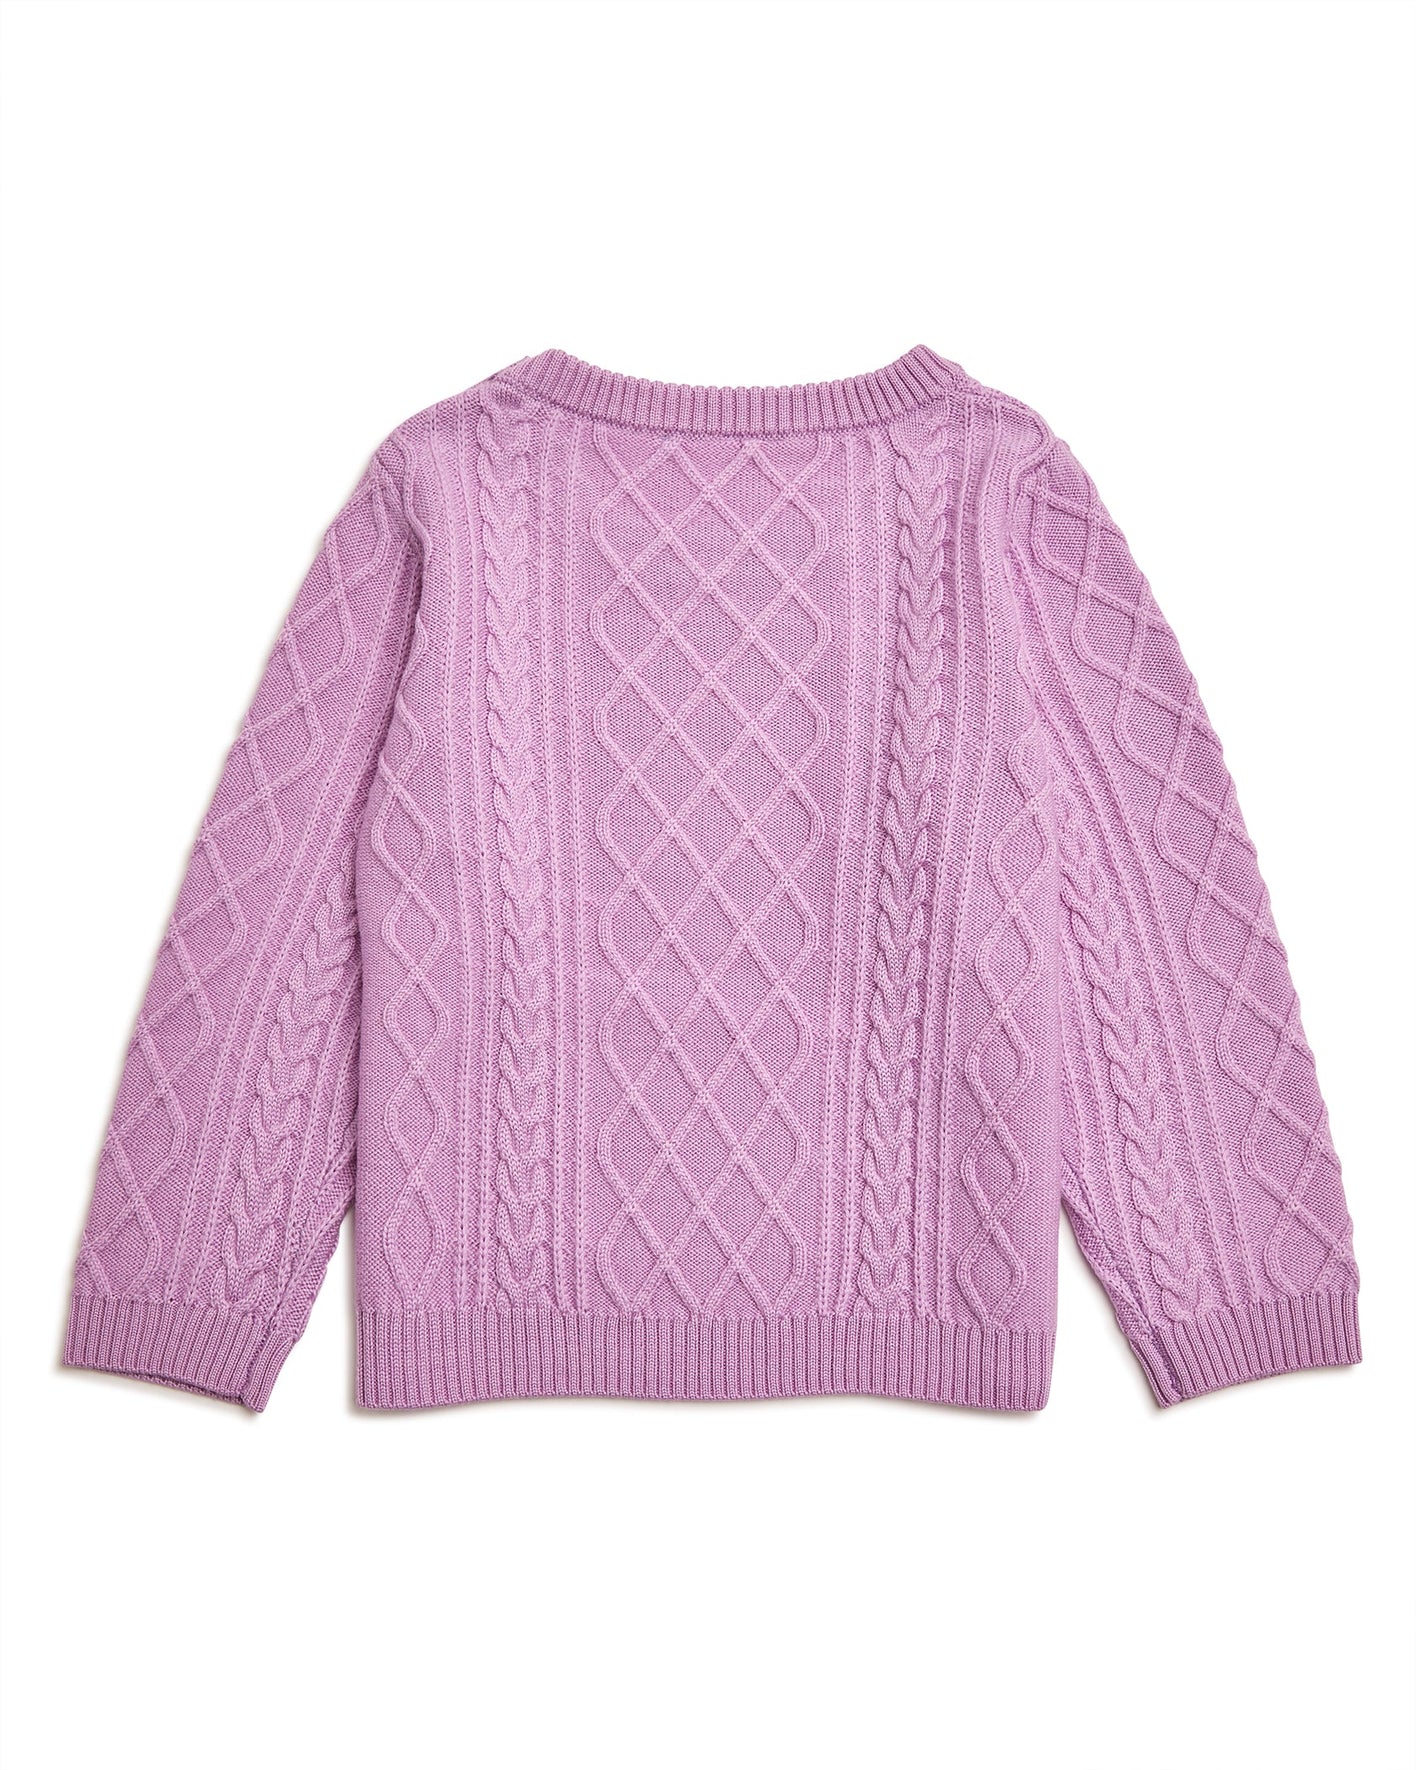 Iris and Wool Pink Cable Sweater